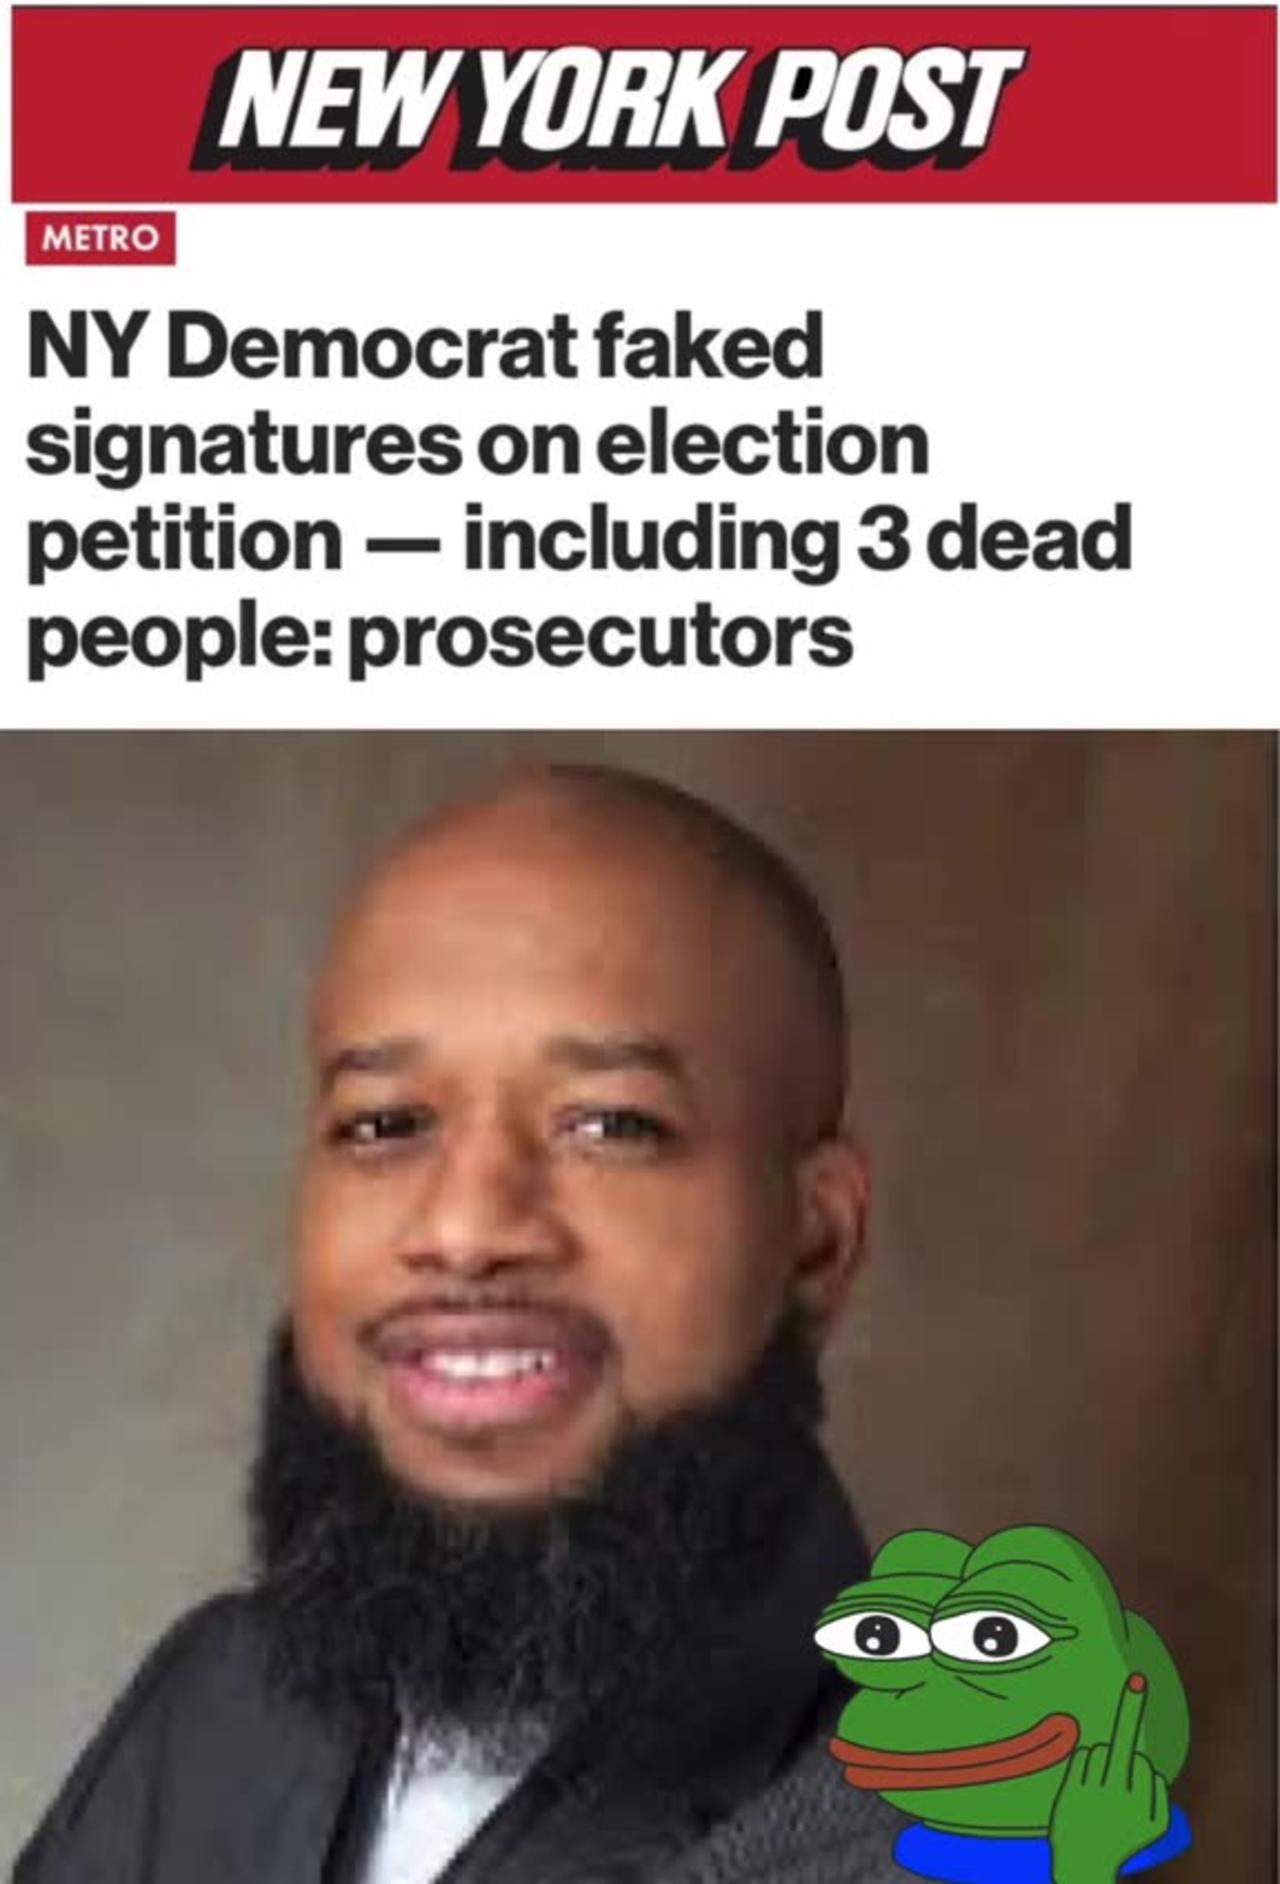 NY Democrat faked signatures on election petition — including Dead People